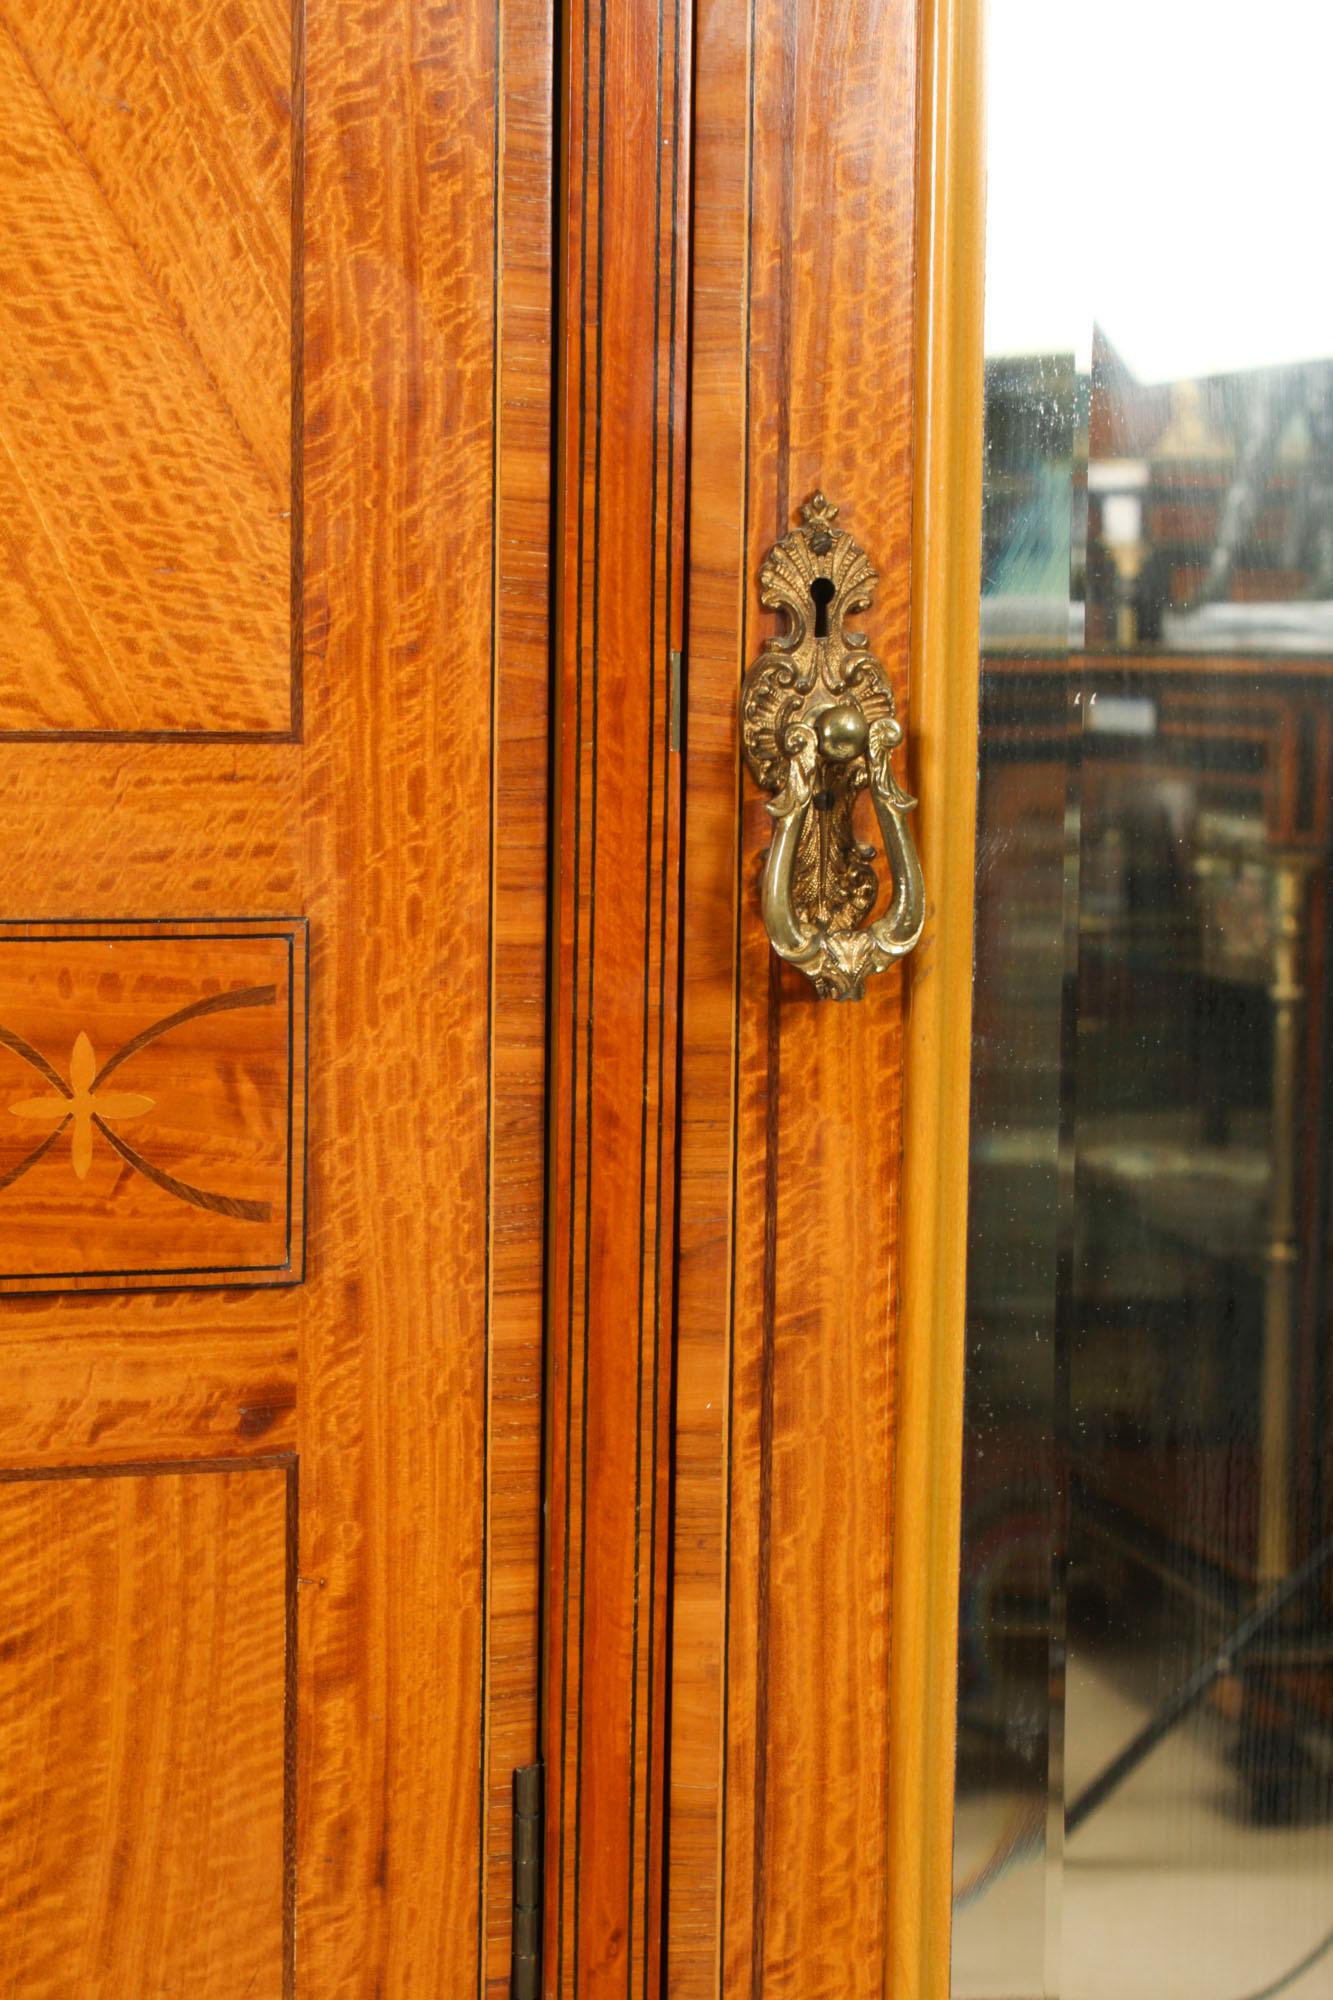 Late 19th Century Antique Satinwood Wardrobe by Maple & Co 19th C For Sale